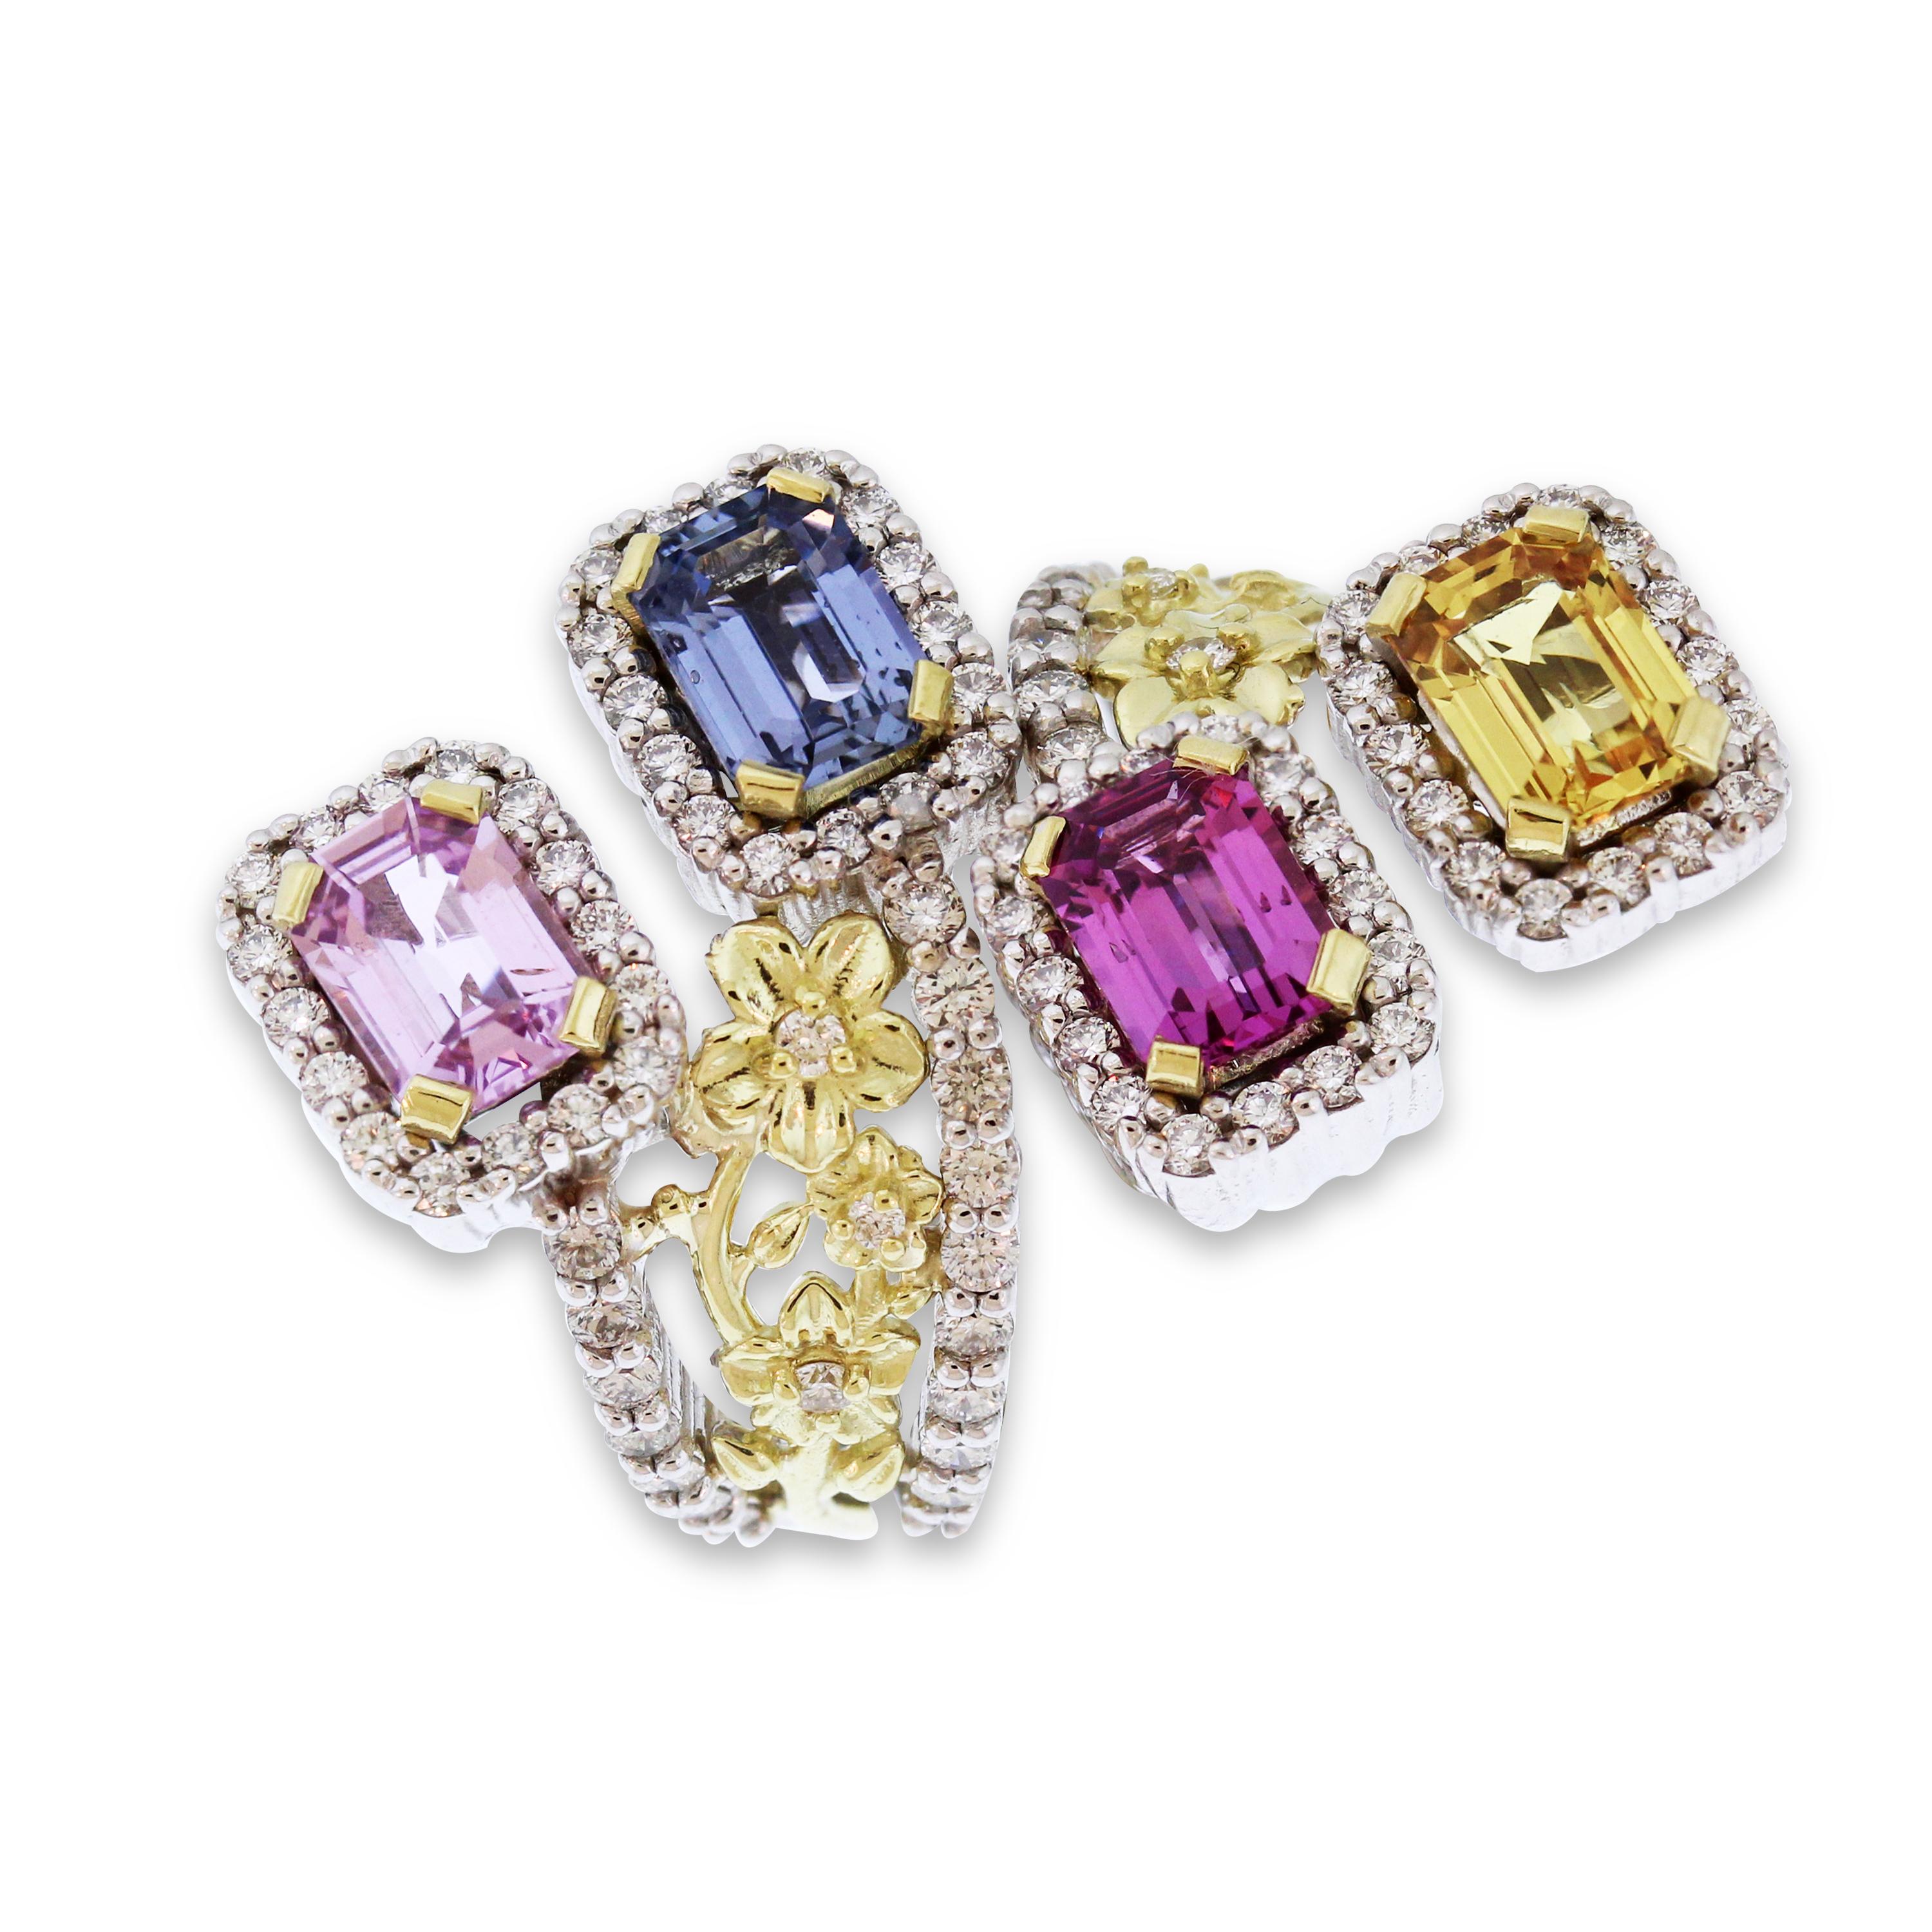 18K Yellow and White Gold Floral Ring with Multi-Color Sapphires and Diamonds

This one-of-a-kind piece by Stambolian showcases the true art, design and craftsmanship that goes behind each piece they design

Ring band is done in two-tone gold with